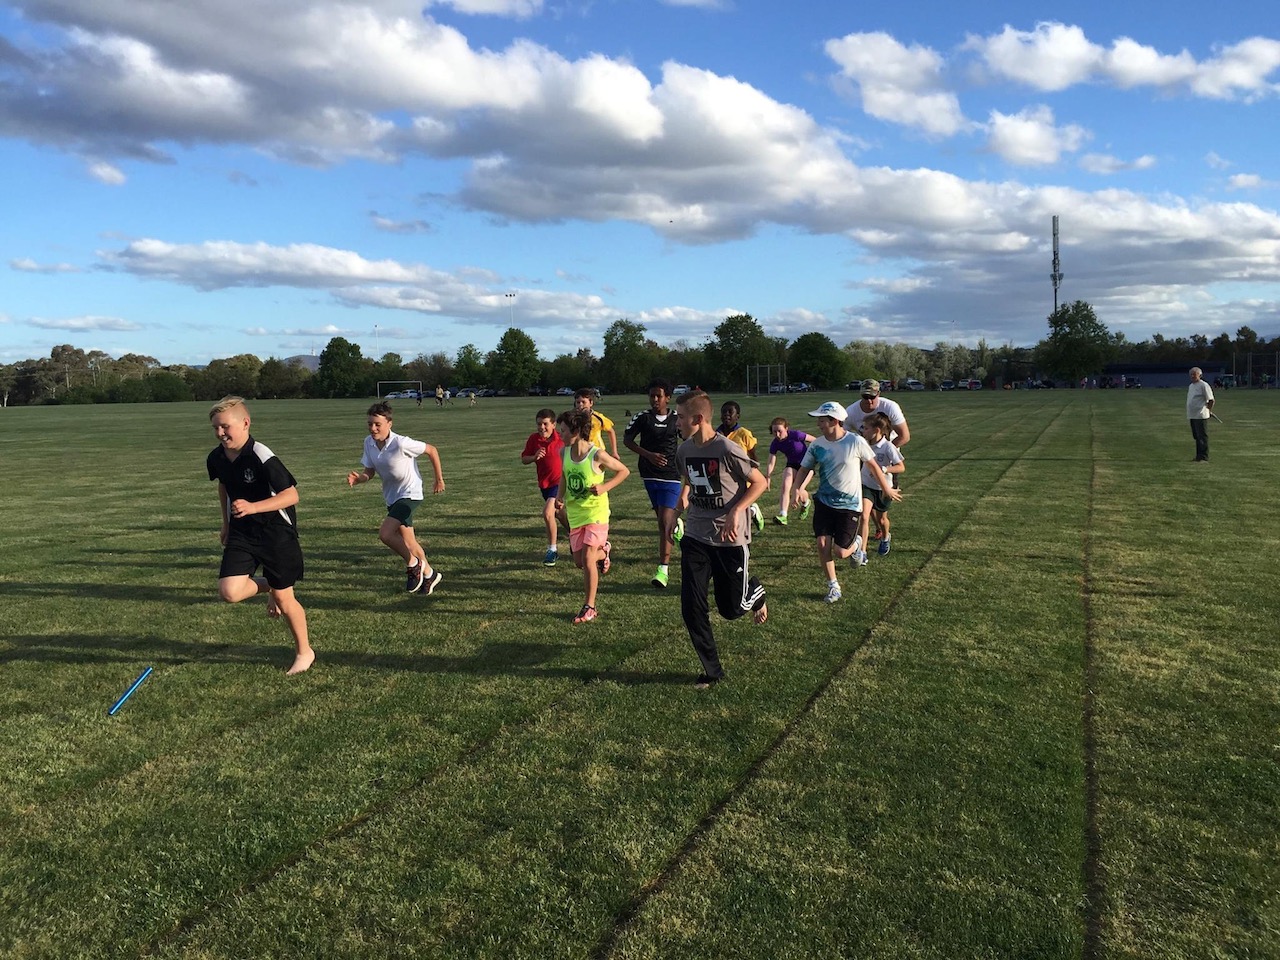 Relay, Sprint and running training at Charnwood in Belconnen